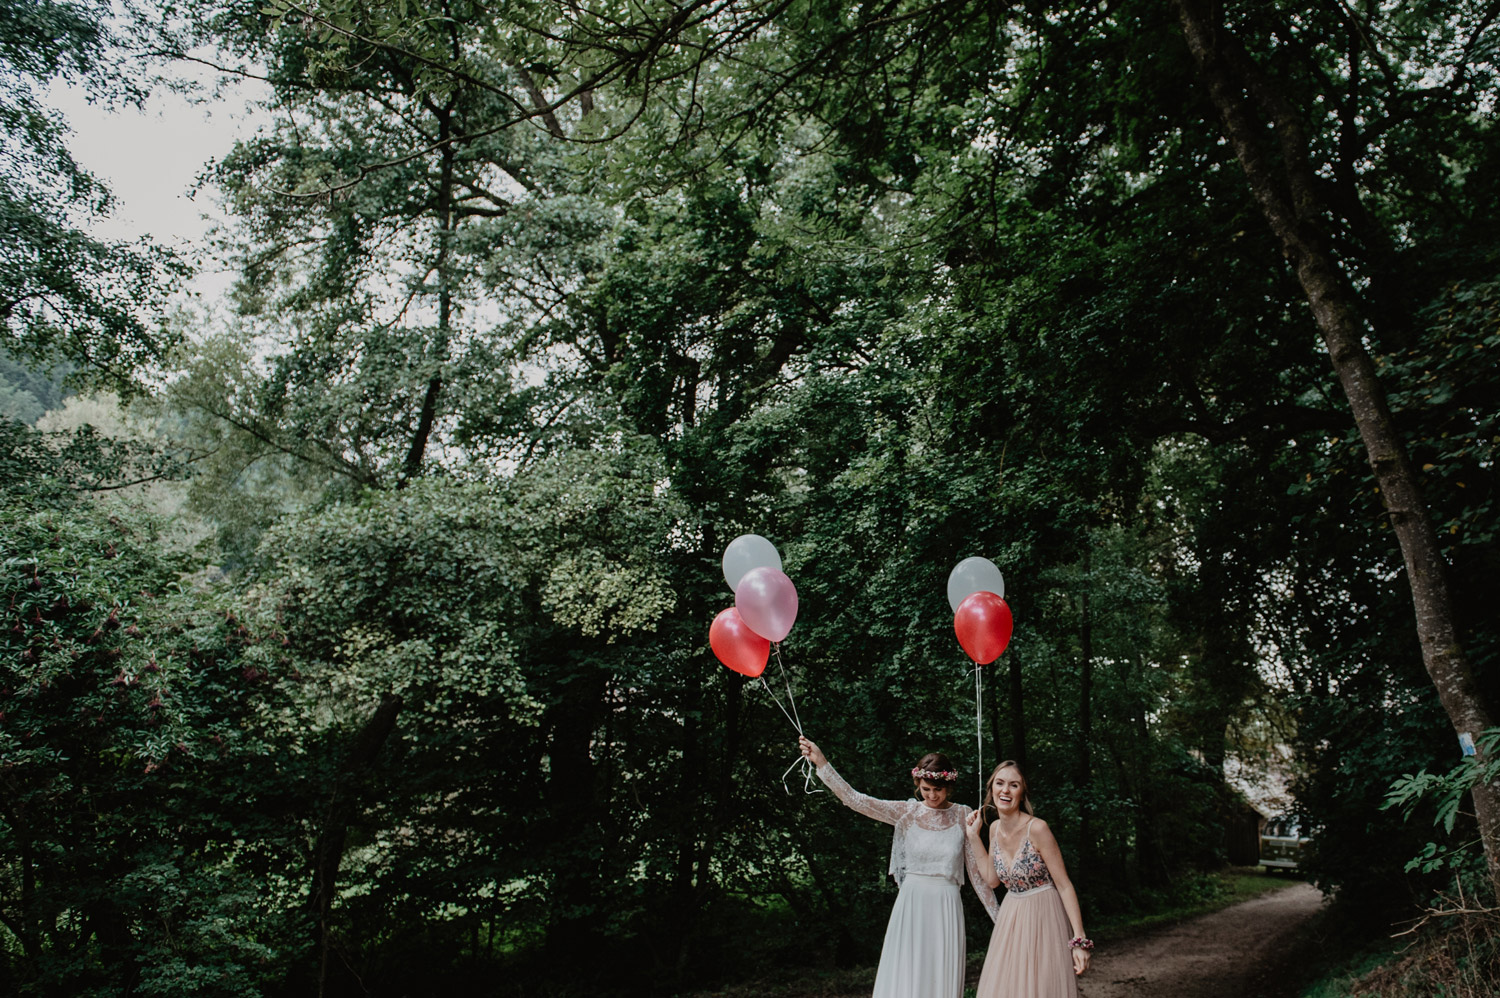 boho bride with flowercrown and bridesmaid with balloons at tipi wedding in forest